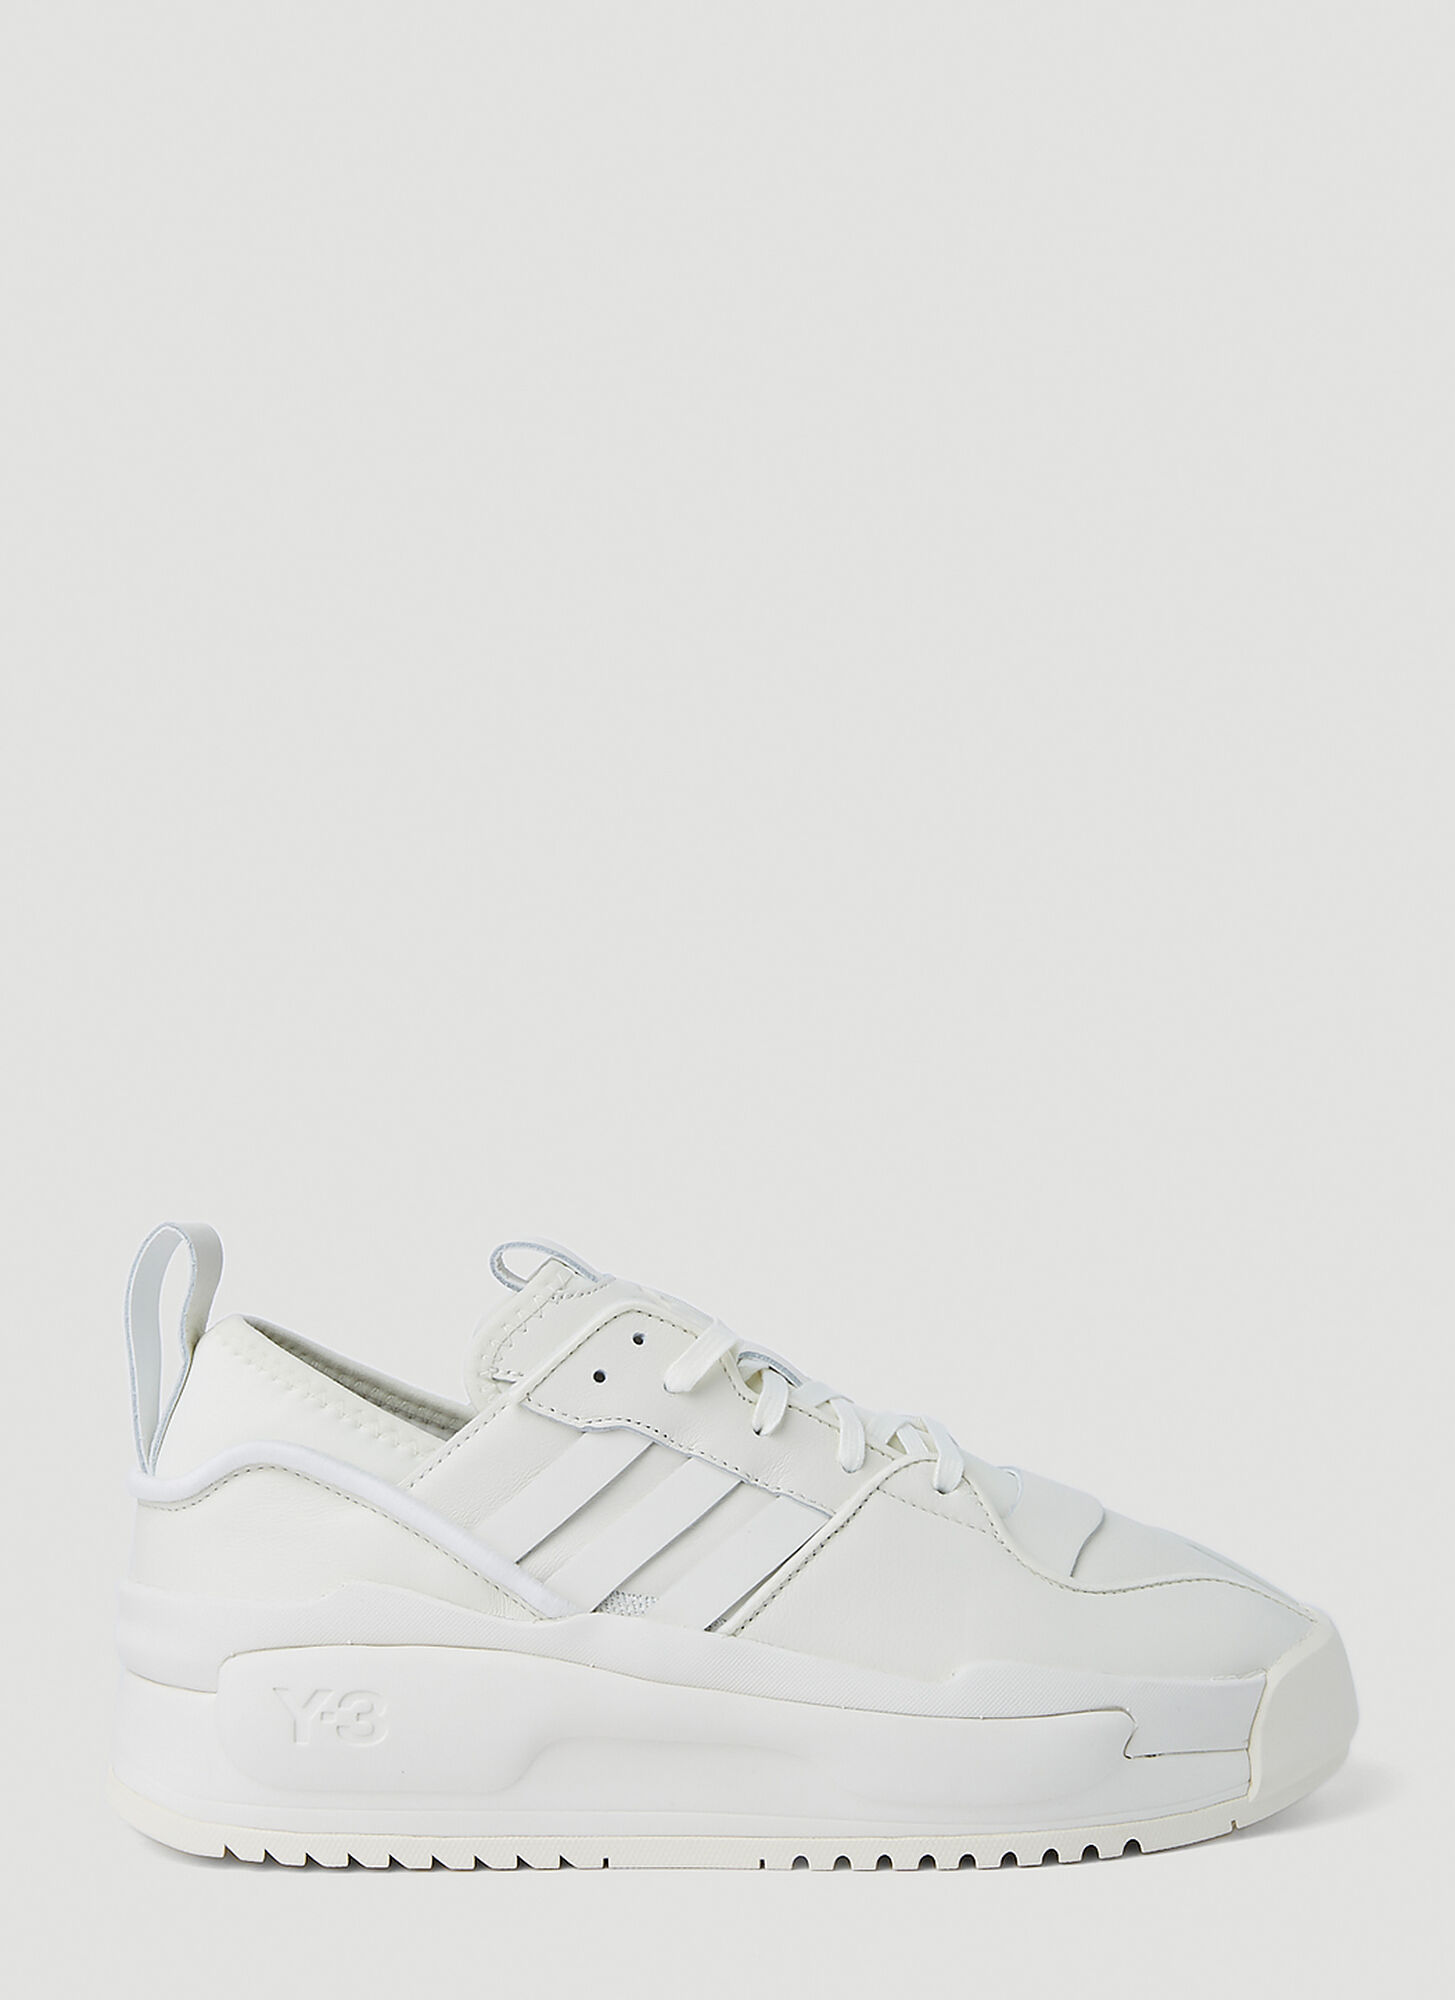 Y-3 Rivalry Sneakers Unisex White